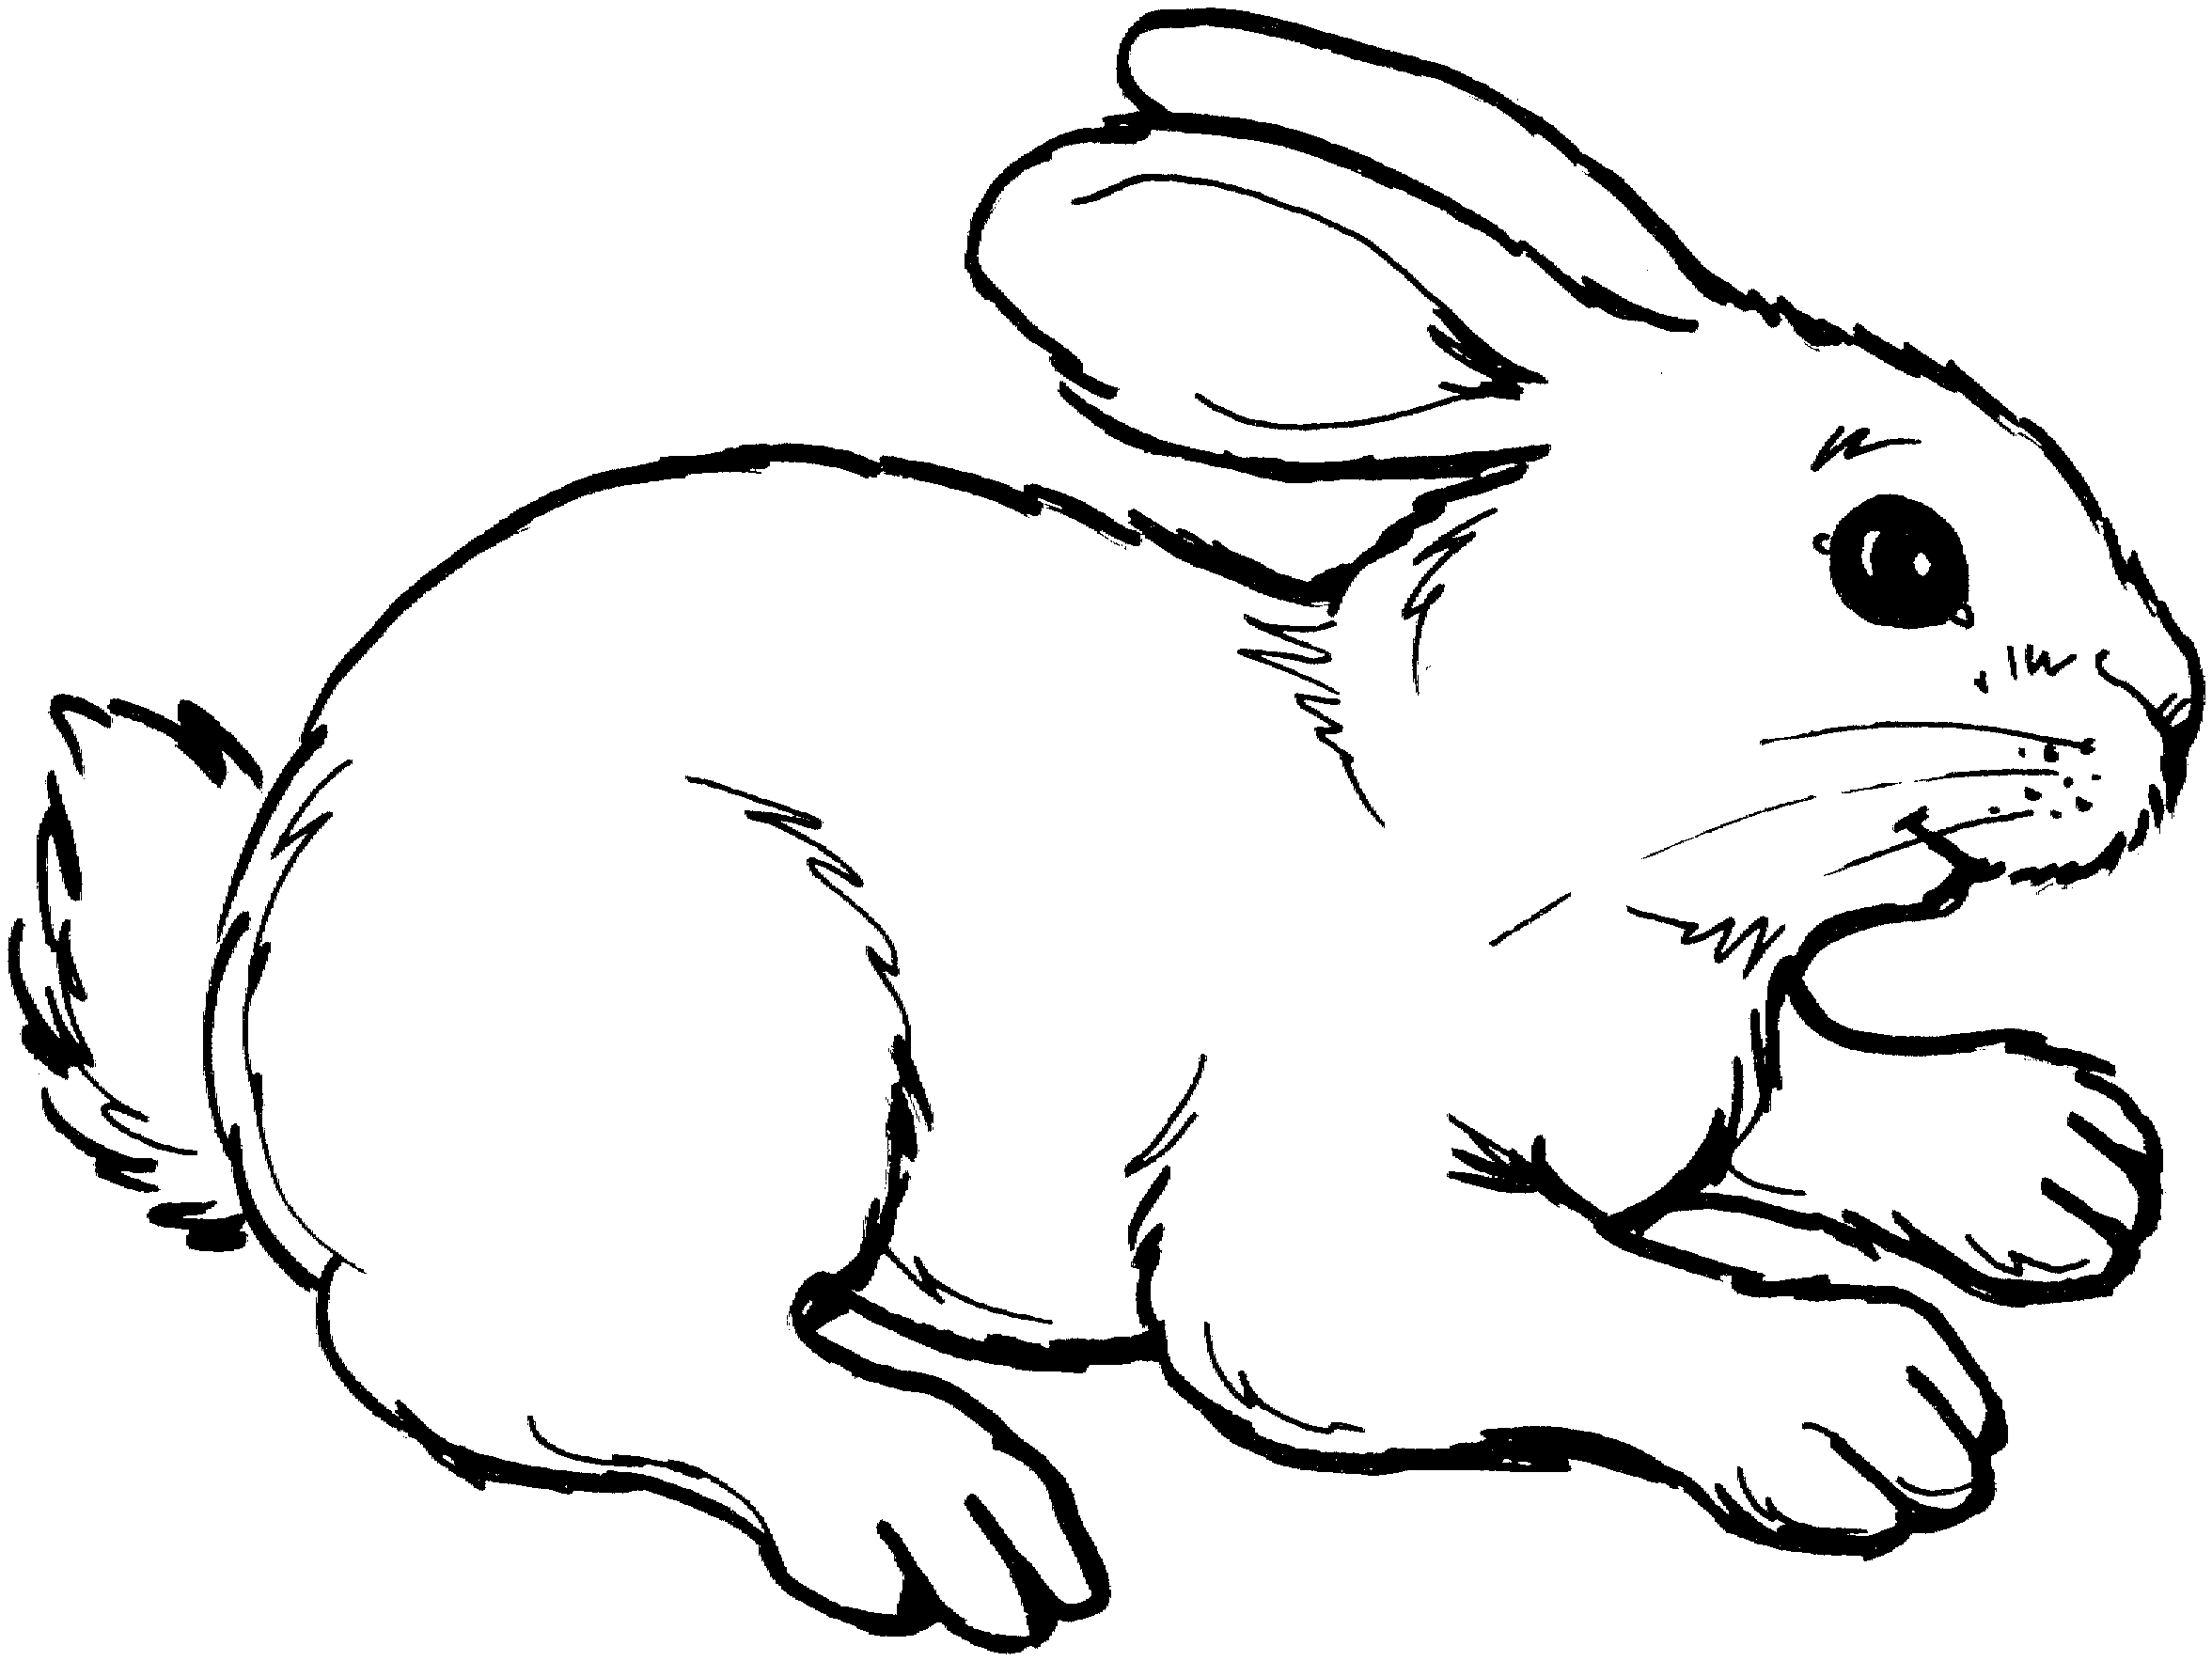 Bunny Jumping Coloring Page - Coloring Pages For All Ages